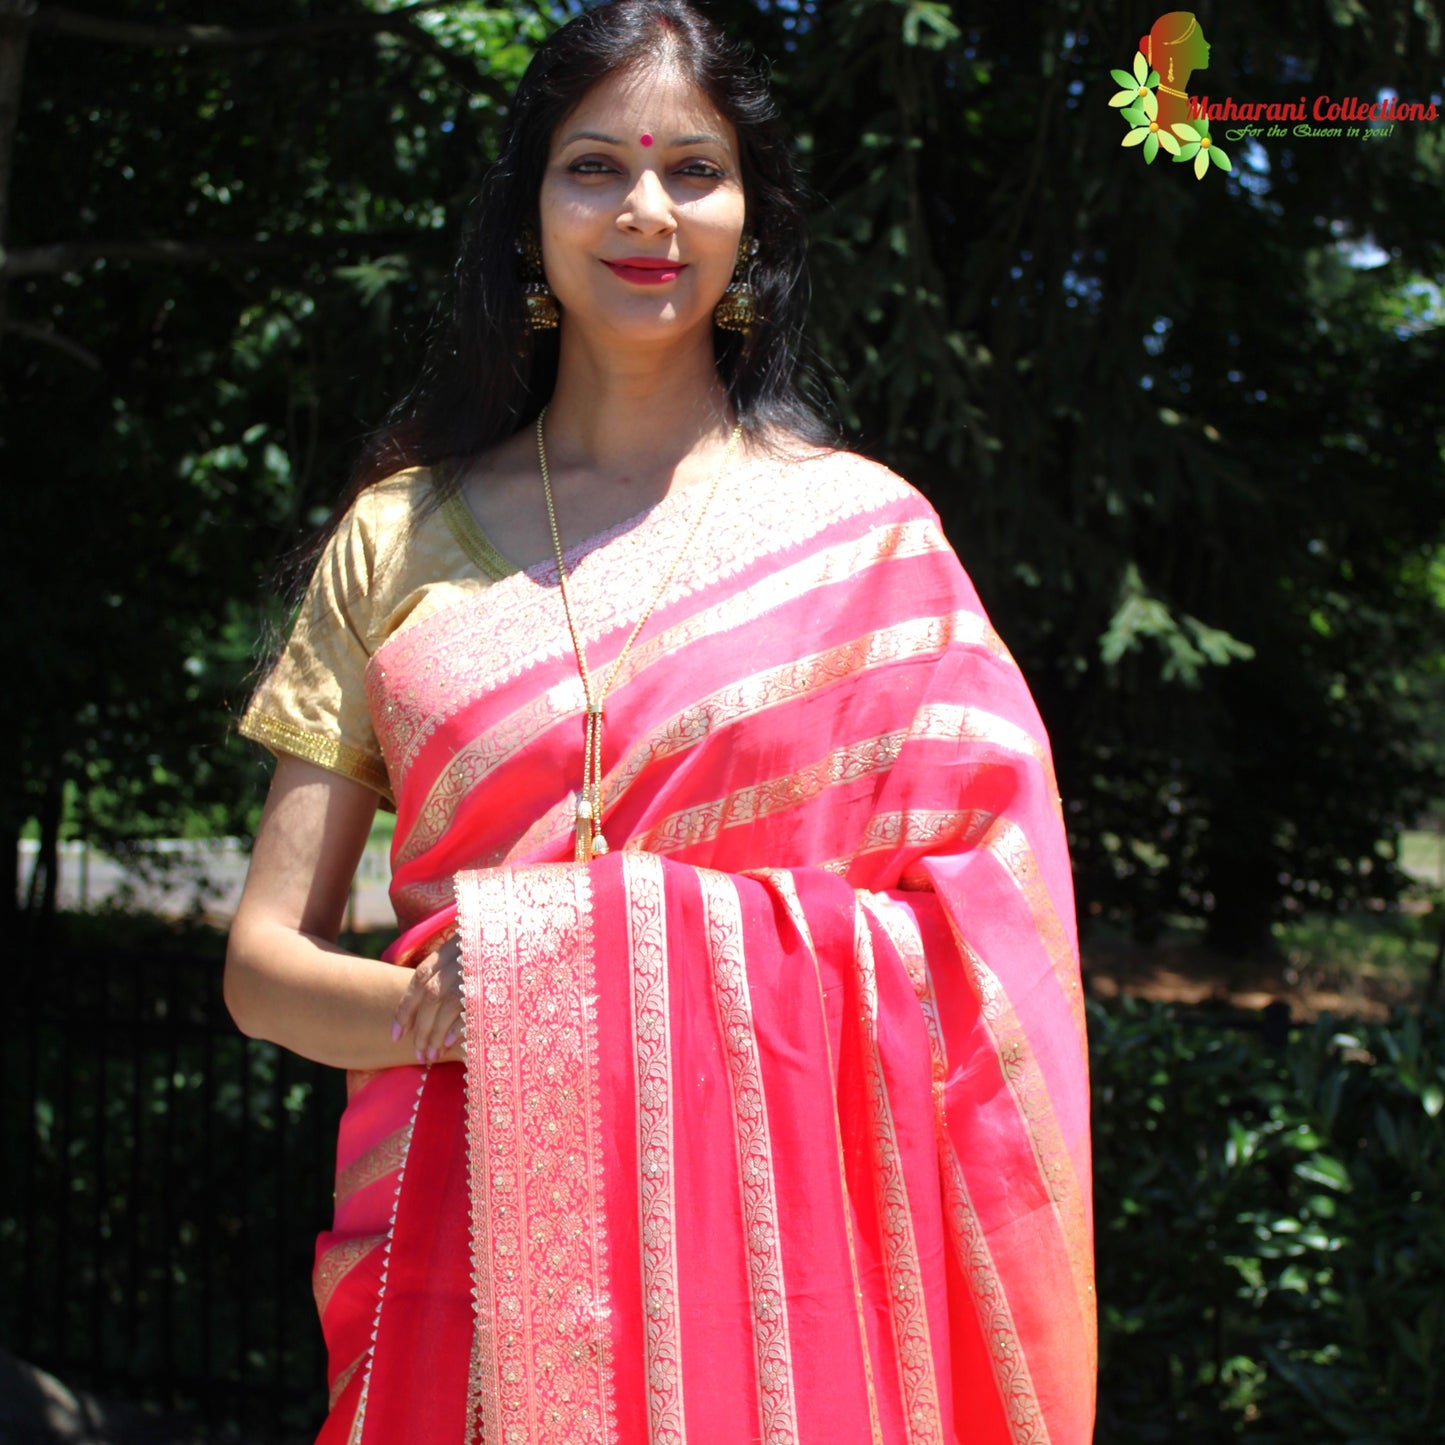 Maharani's Pure Banarasi Georgette Saree - Red, Pink and Orange (with stitched Blouse and Petticoat)